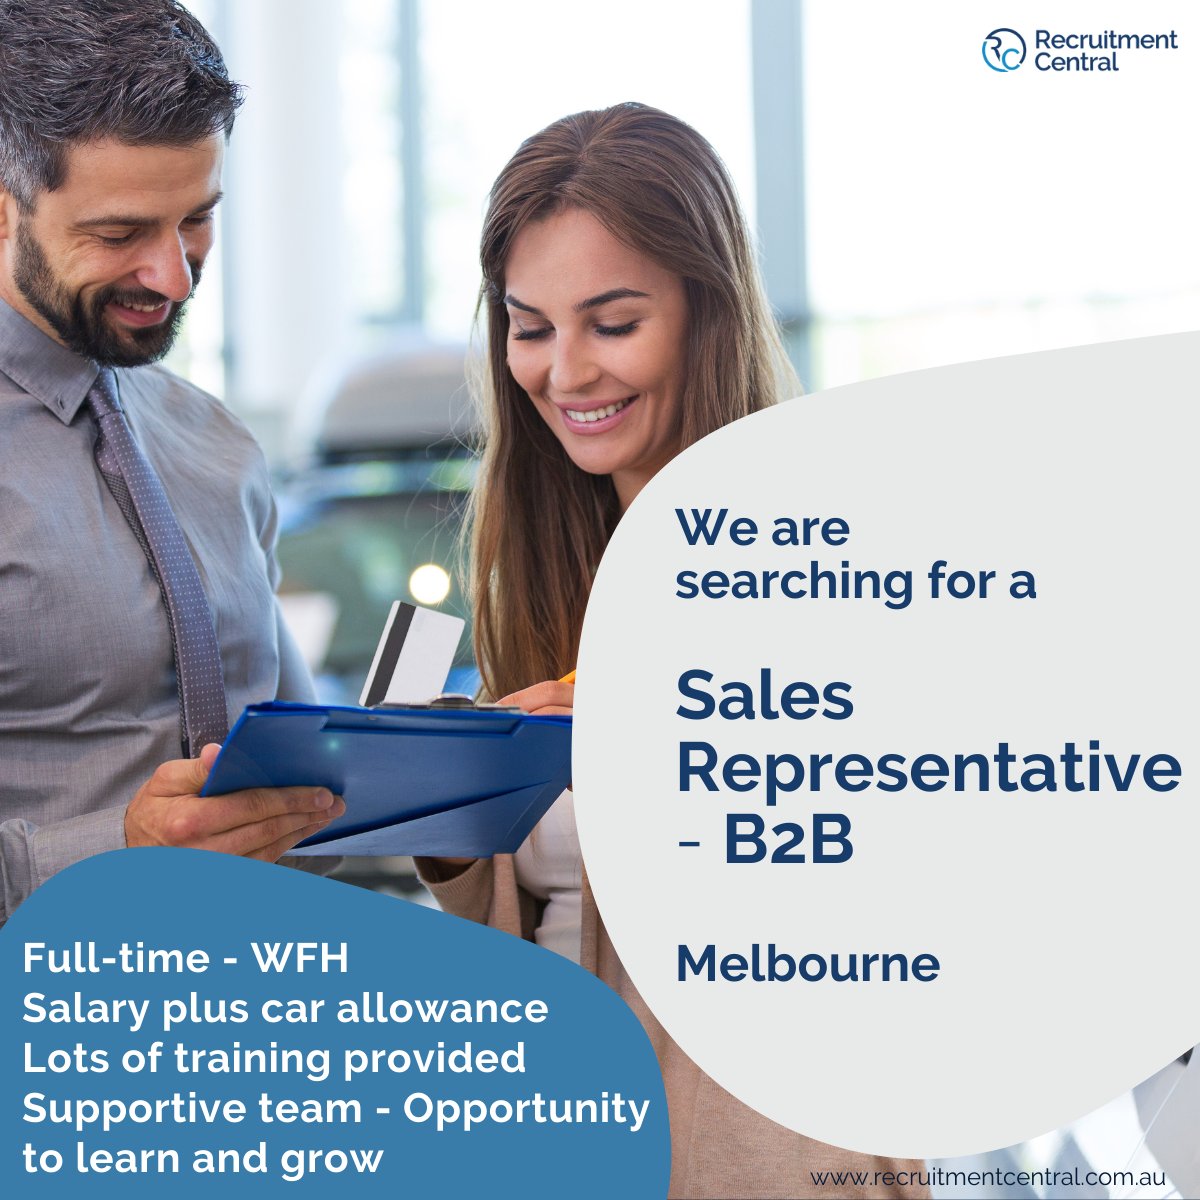 Join an established group with recession-proof products. They are looking to expand their current Melbourne market and have created a new role on their sales team.
Read more here: bit.ly/3Xnlbg9
#melbournejobs #recruitmentcentral #salesrepresentativejobs